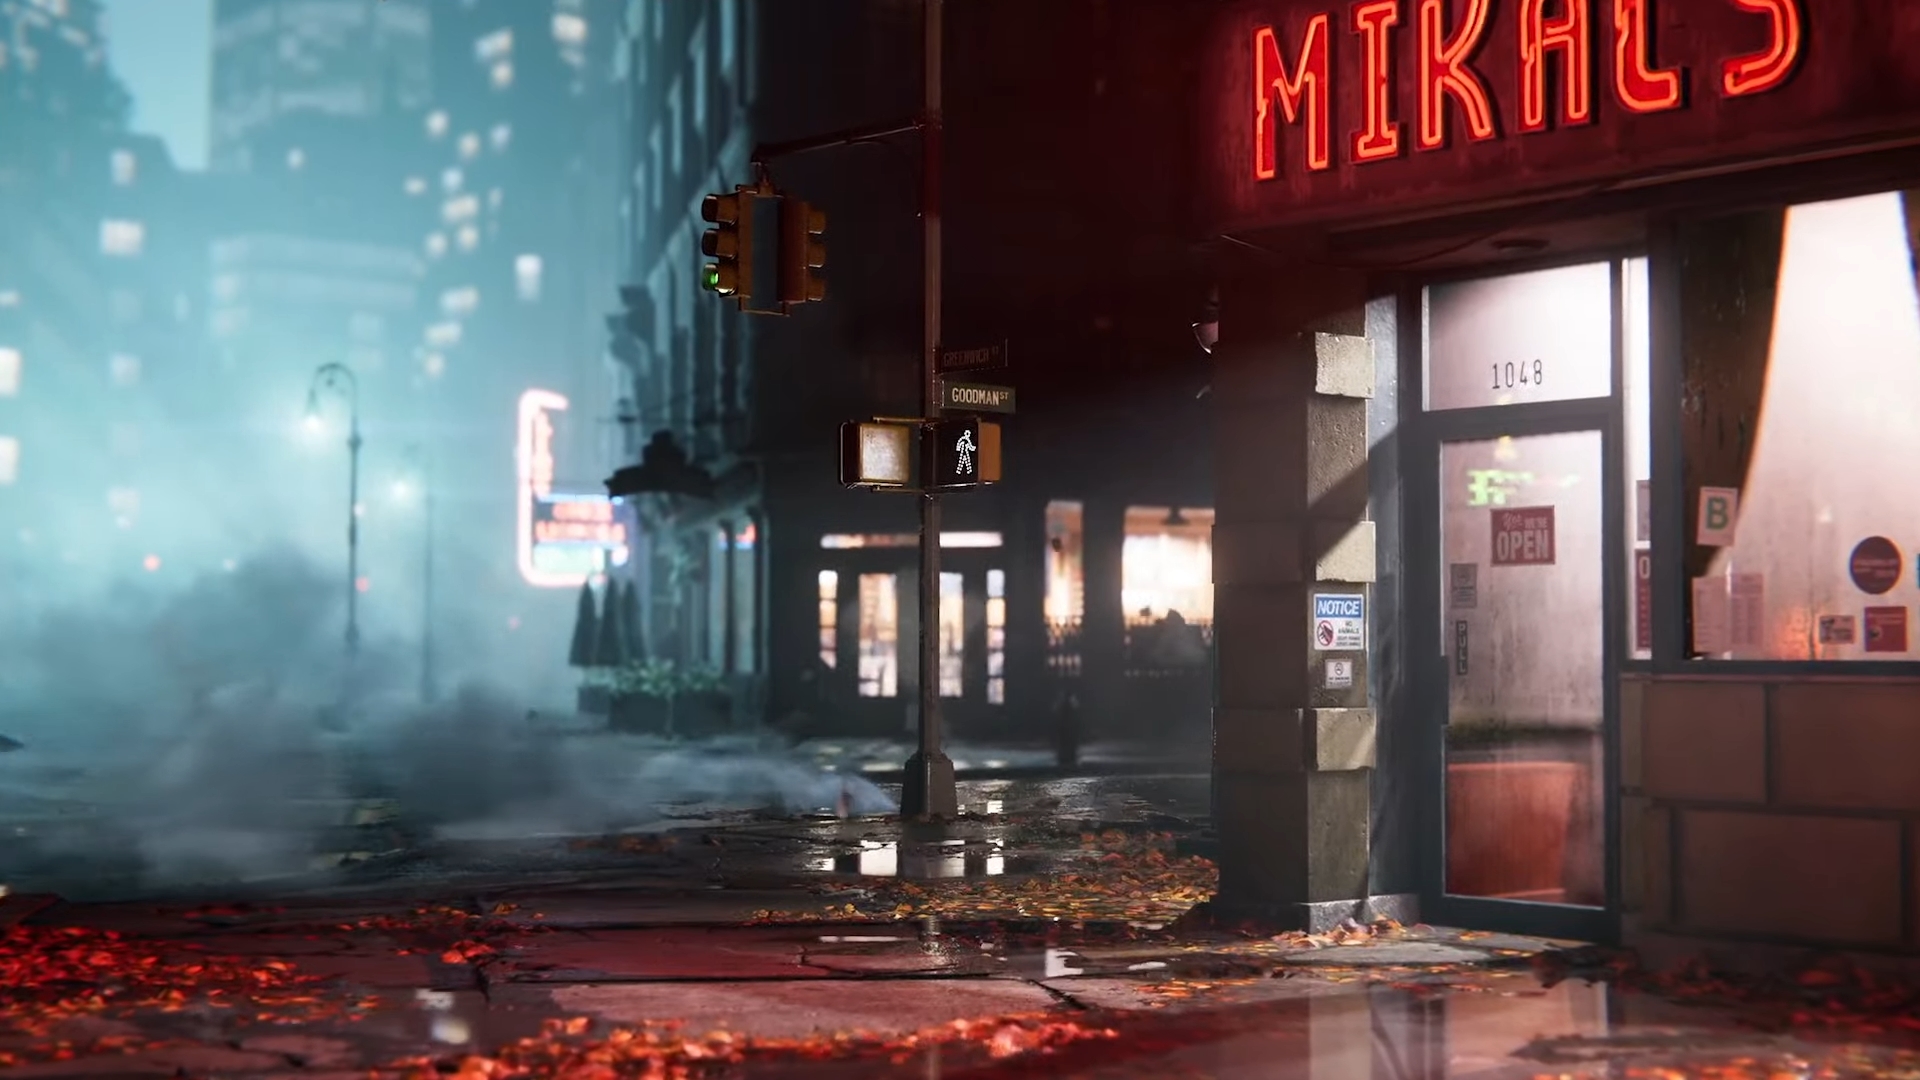 Screenshot from Marvel's Spider-Man 2 trailer showing a New York City street corner at night, lit up by streetlights and lights from inside buildings